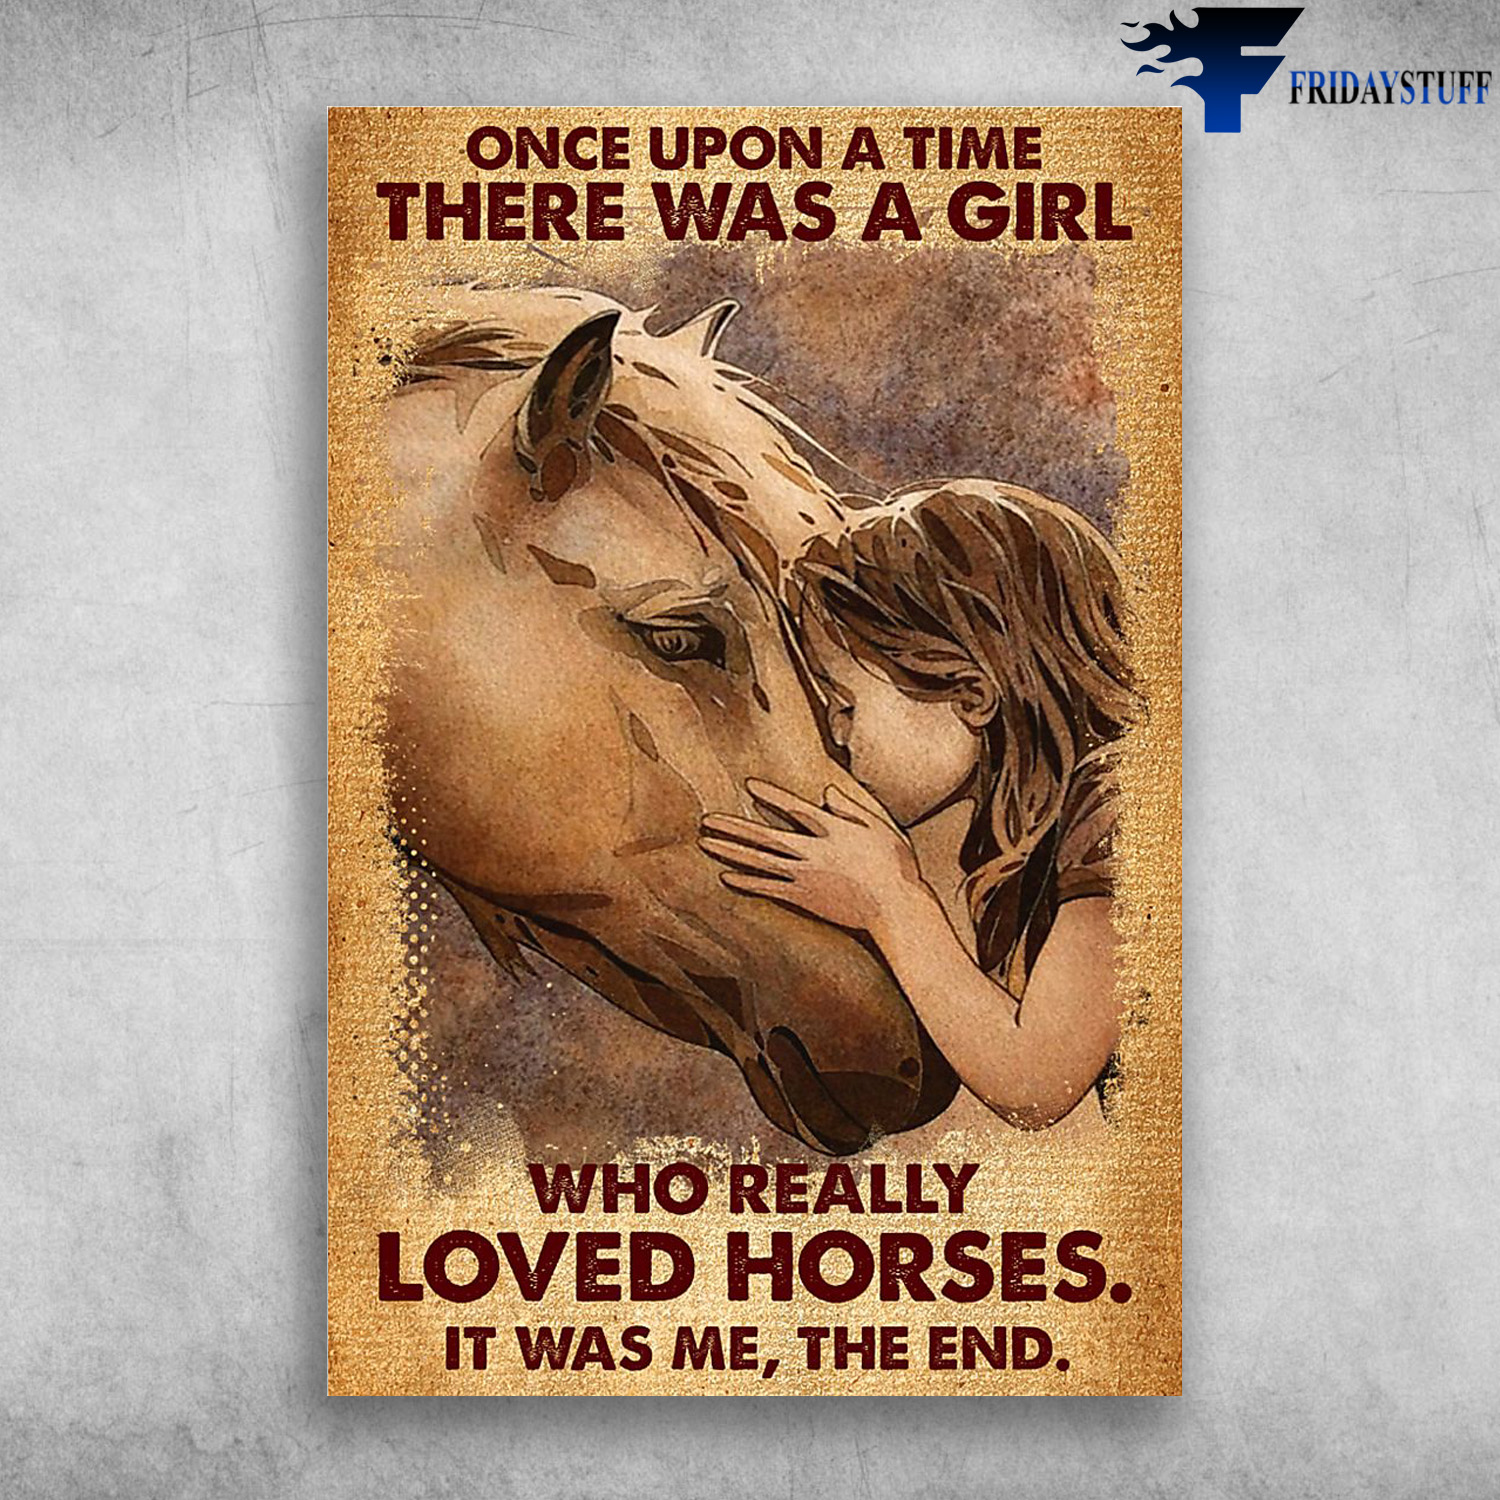 A Little Girl Love Horses - Once Upon A Time, There Was A Girl, Who Really Loved Horses